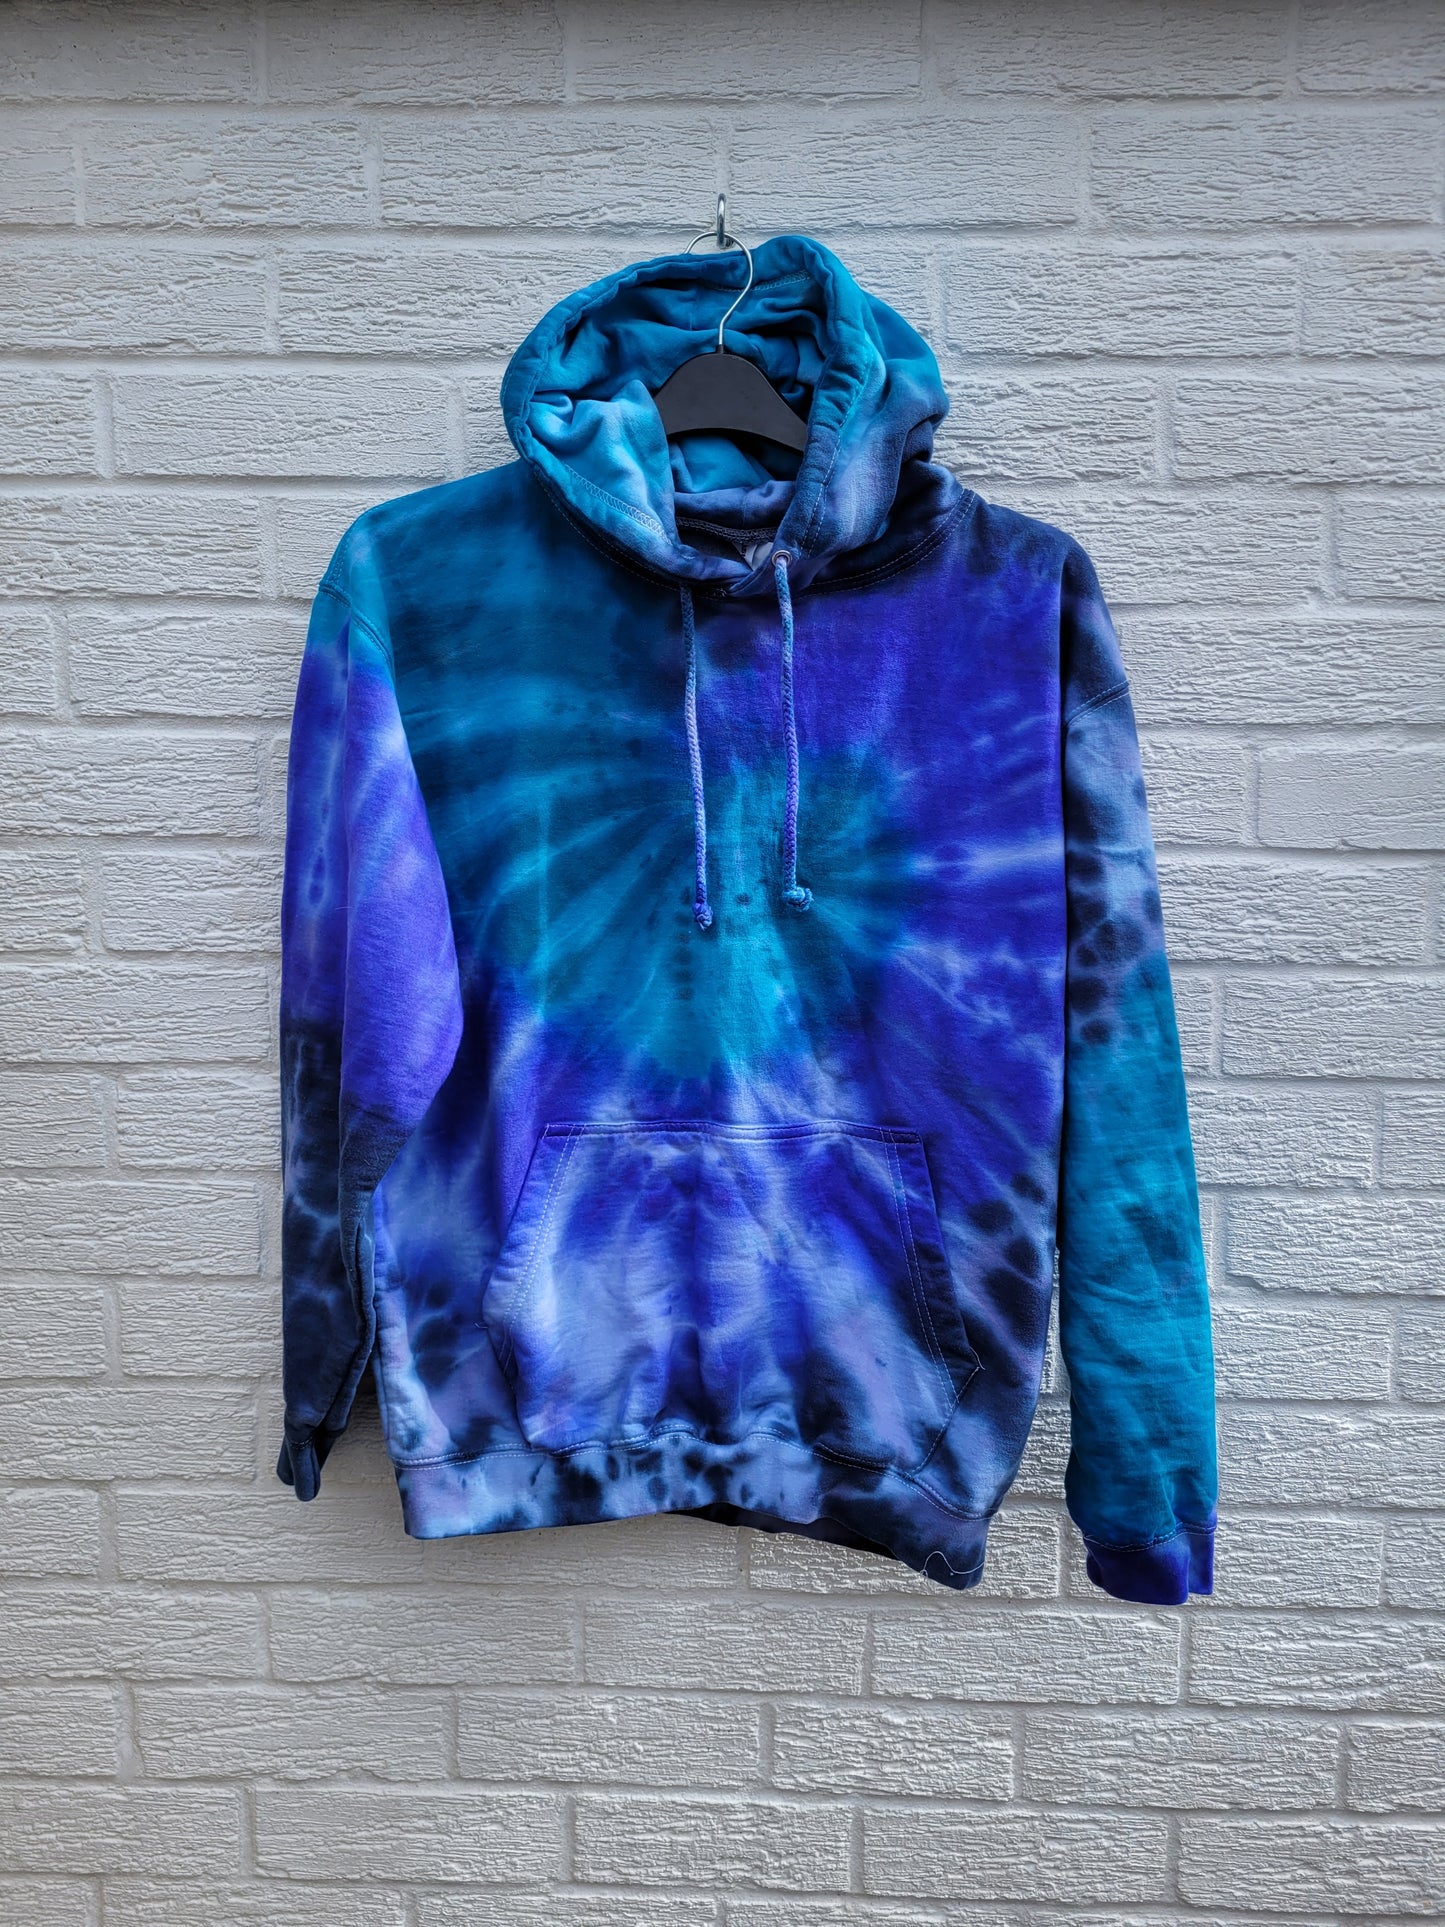 Organic cotton tie dye hoodie, in aqua, blue and navy shades, the perfect cosy cover up for the coming summer evenings.

These one of a kind hoodies are hand dyed to order, in 80% Organic Cotton, 20% Recycled Polyester, double fabric hood, front pouch pocket, ribbed cuffs and hem